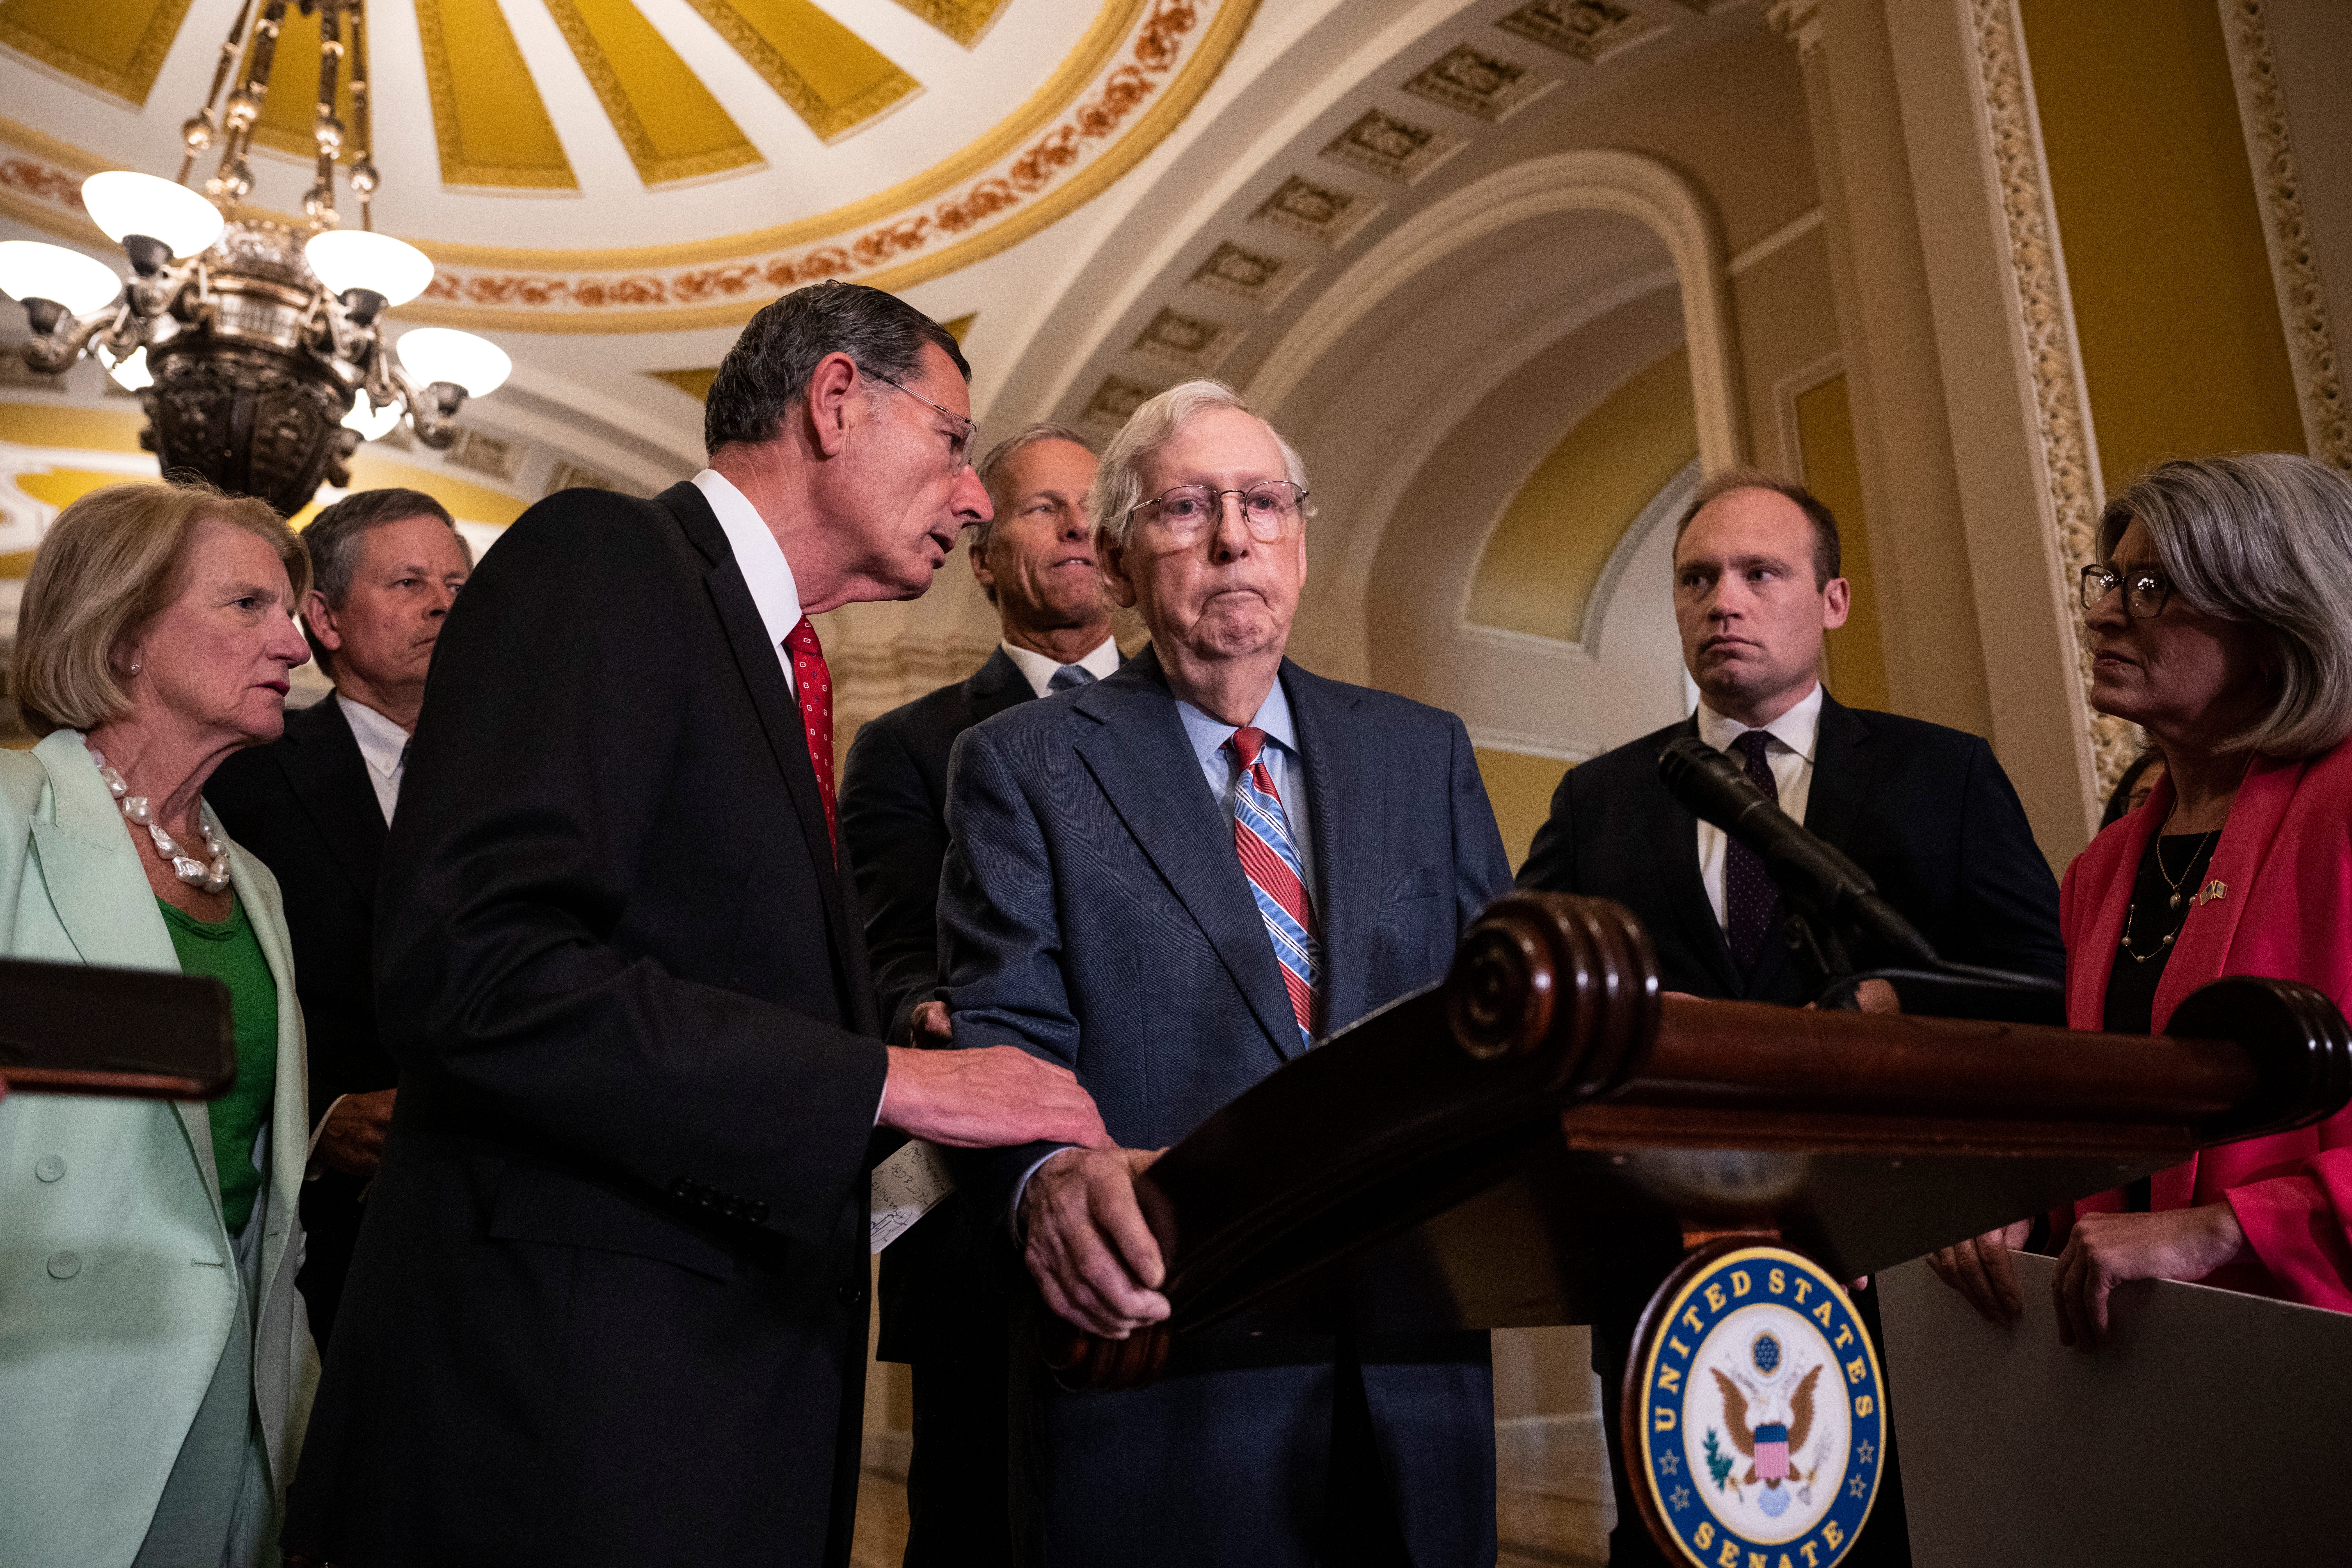 Fact check: Trump, other GOP leaders called for McConnell to step down after freezes